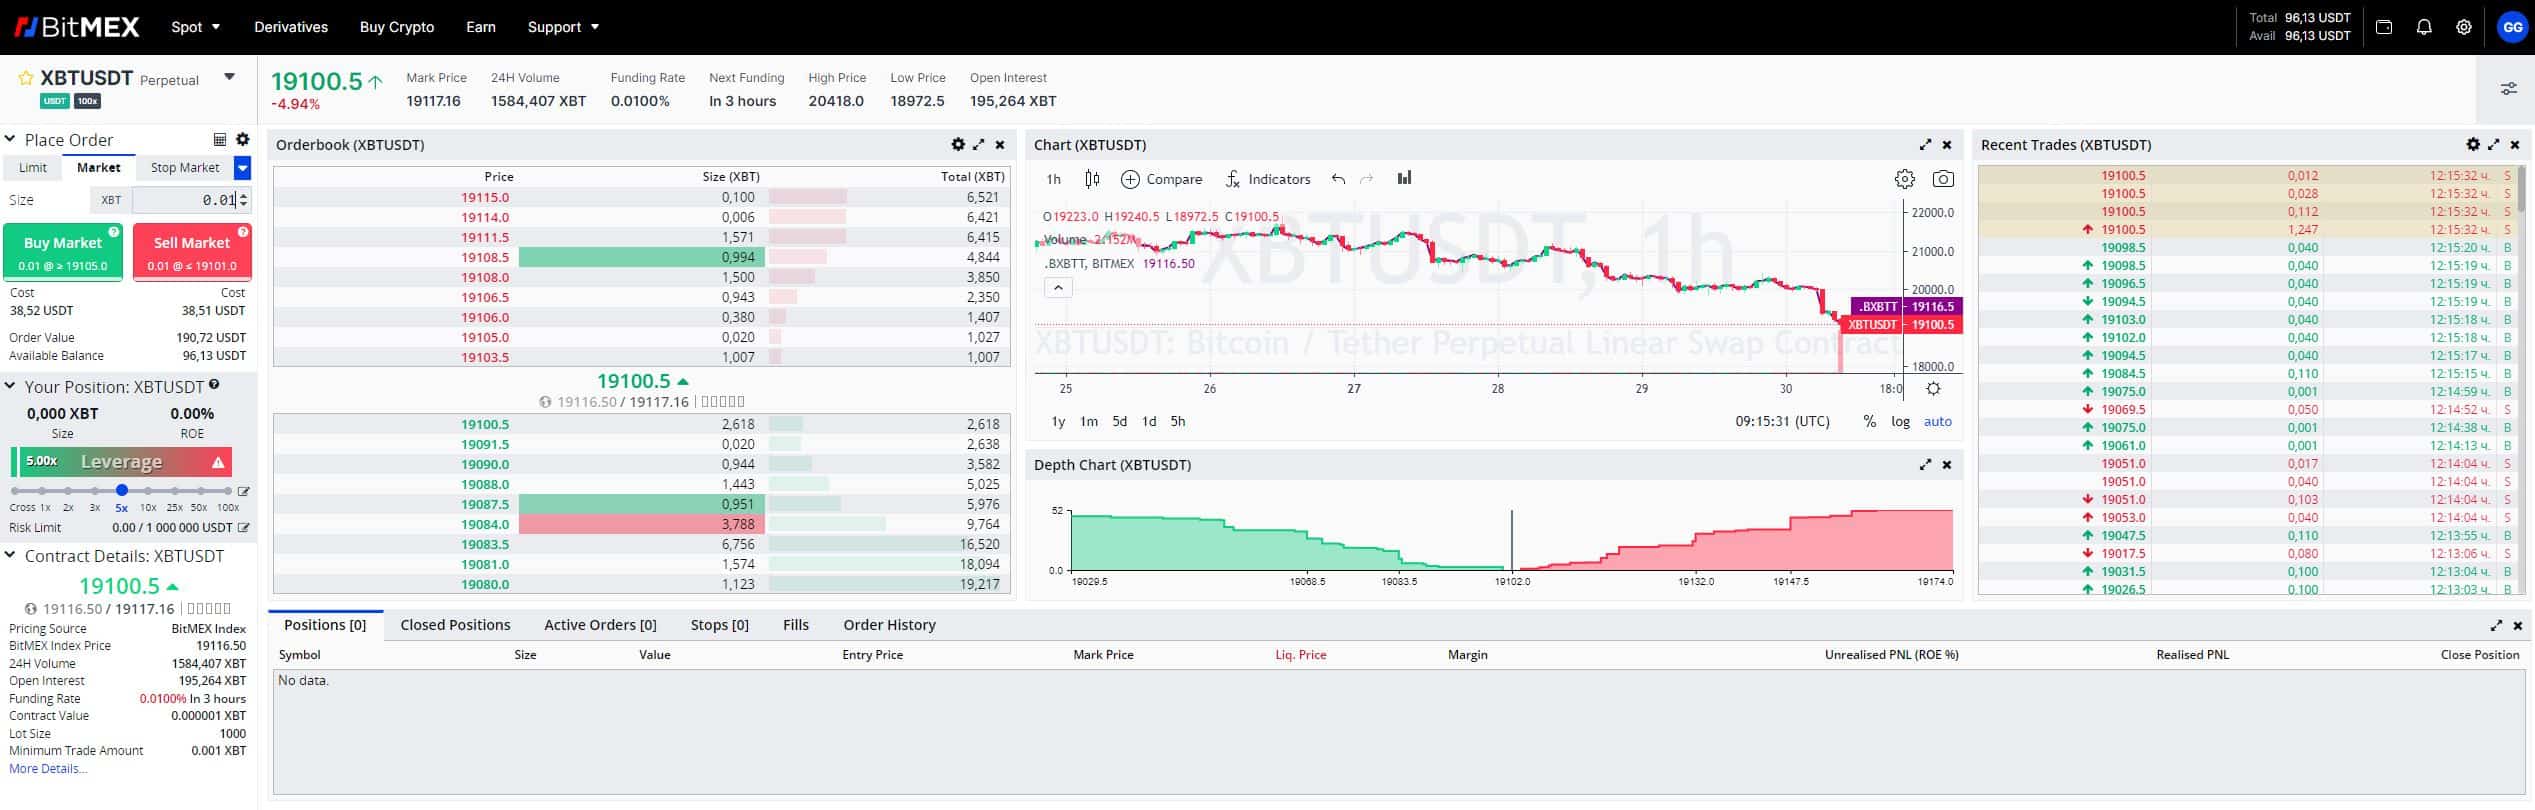 Cash management in trading with BitMEX - Trading Systems - 22 February - Traders' Blogs